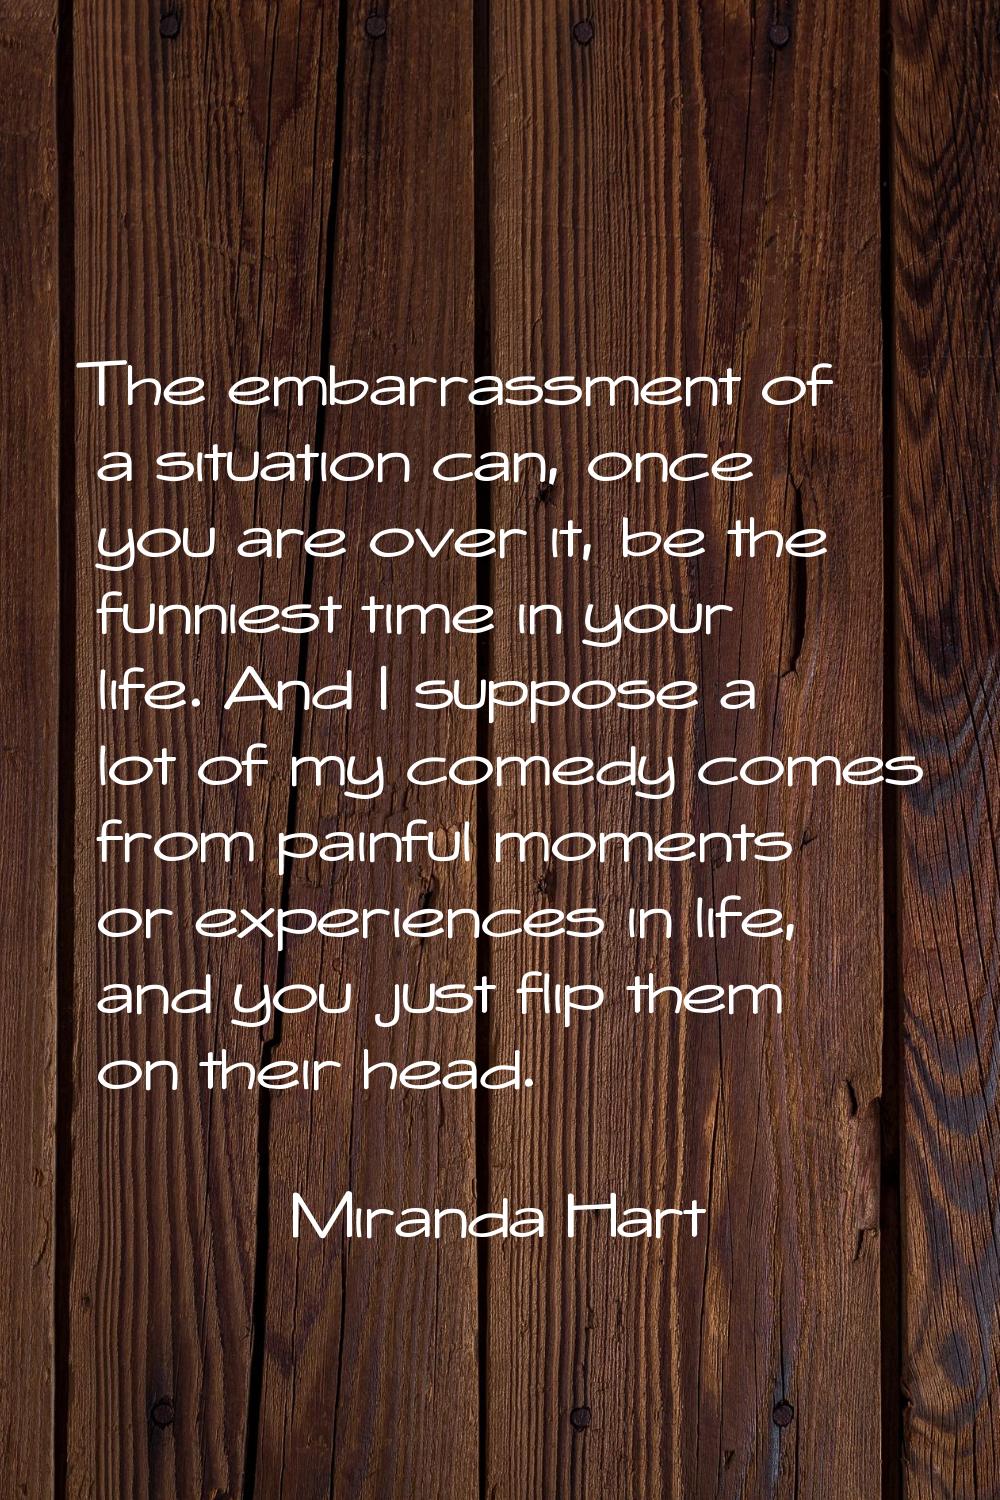 The embarrassment of a situation can, once you are over it, be the funniest time in your life. And 